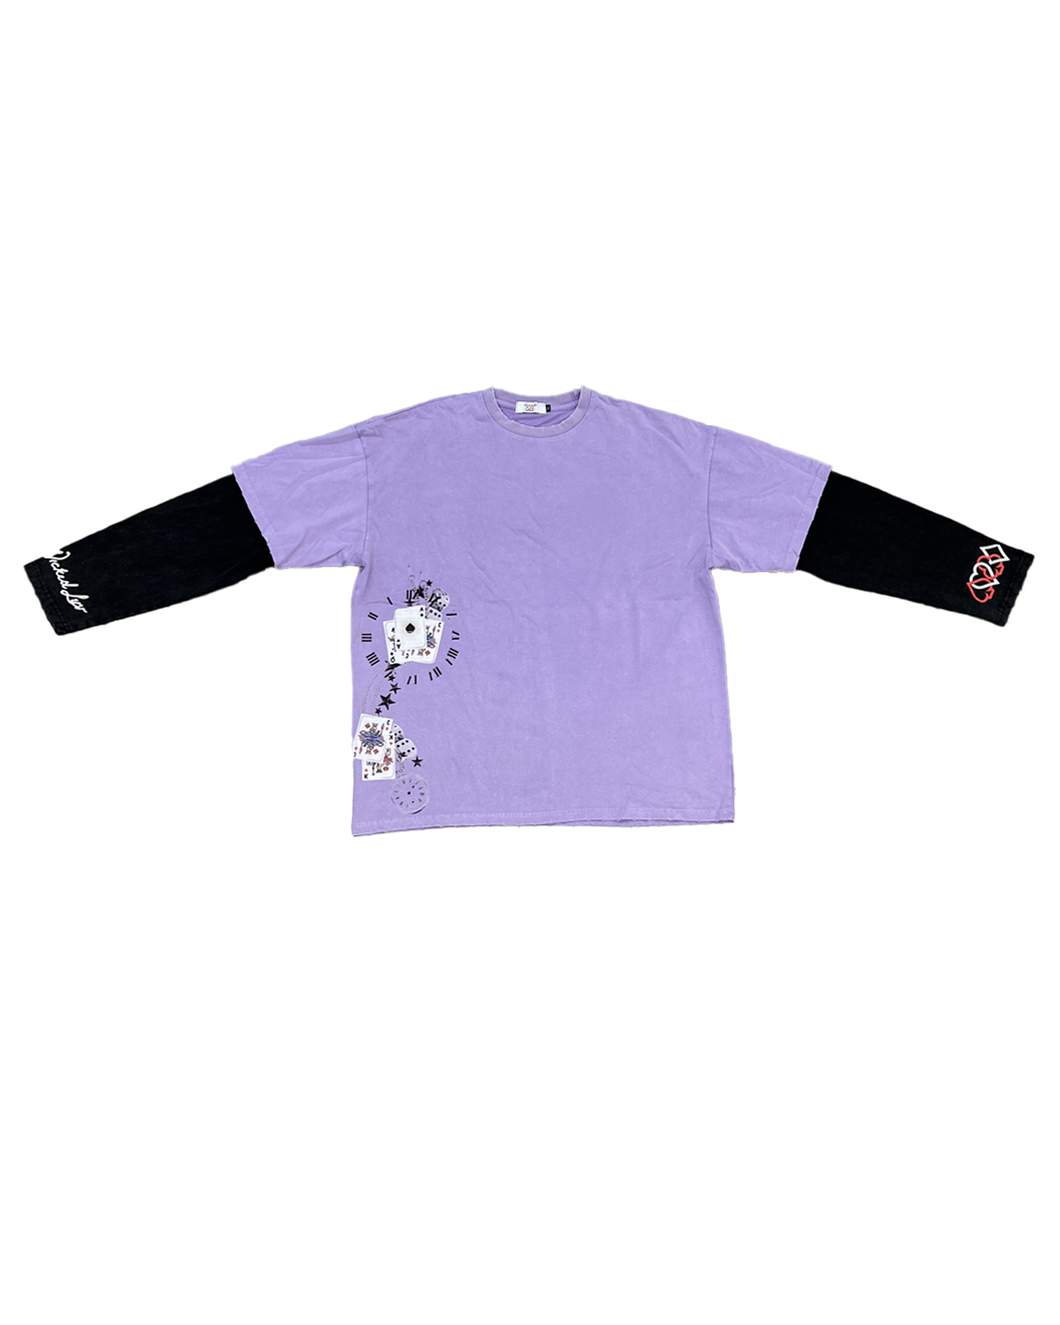 HANDS OF THE WICKED LONG SLEEVE (PURPLE)